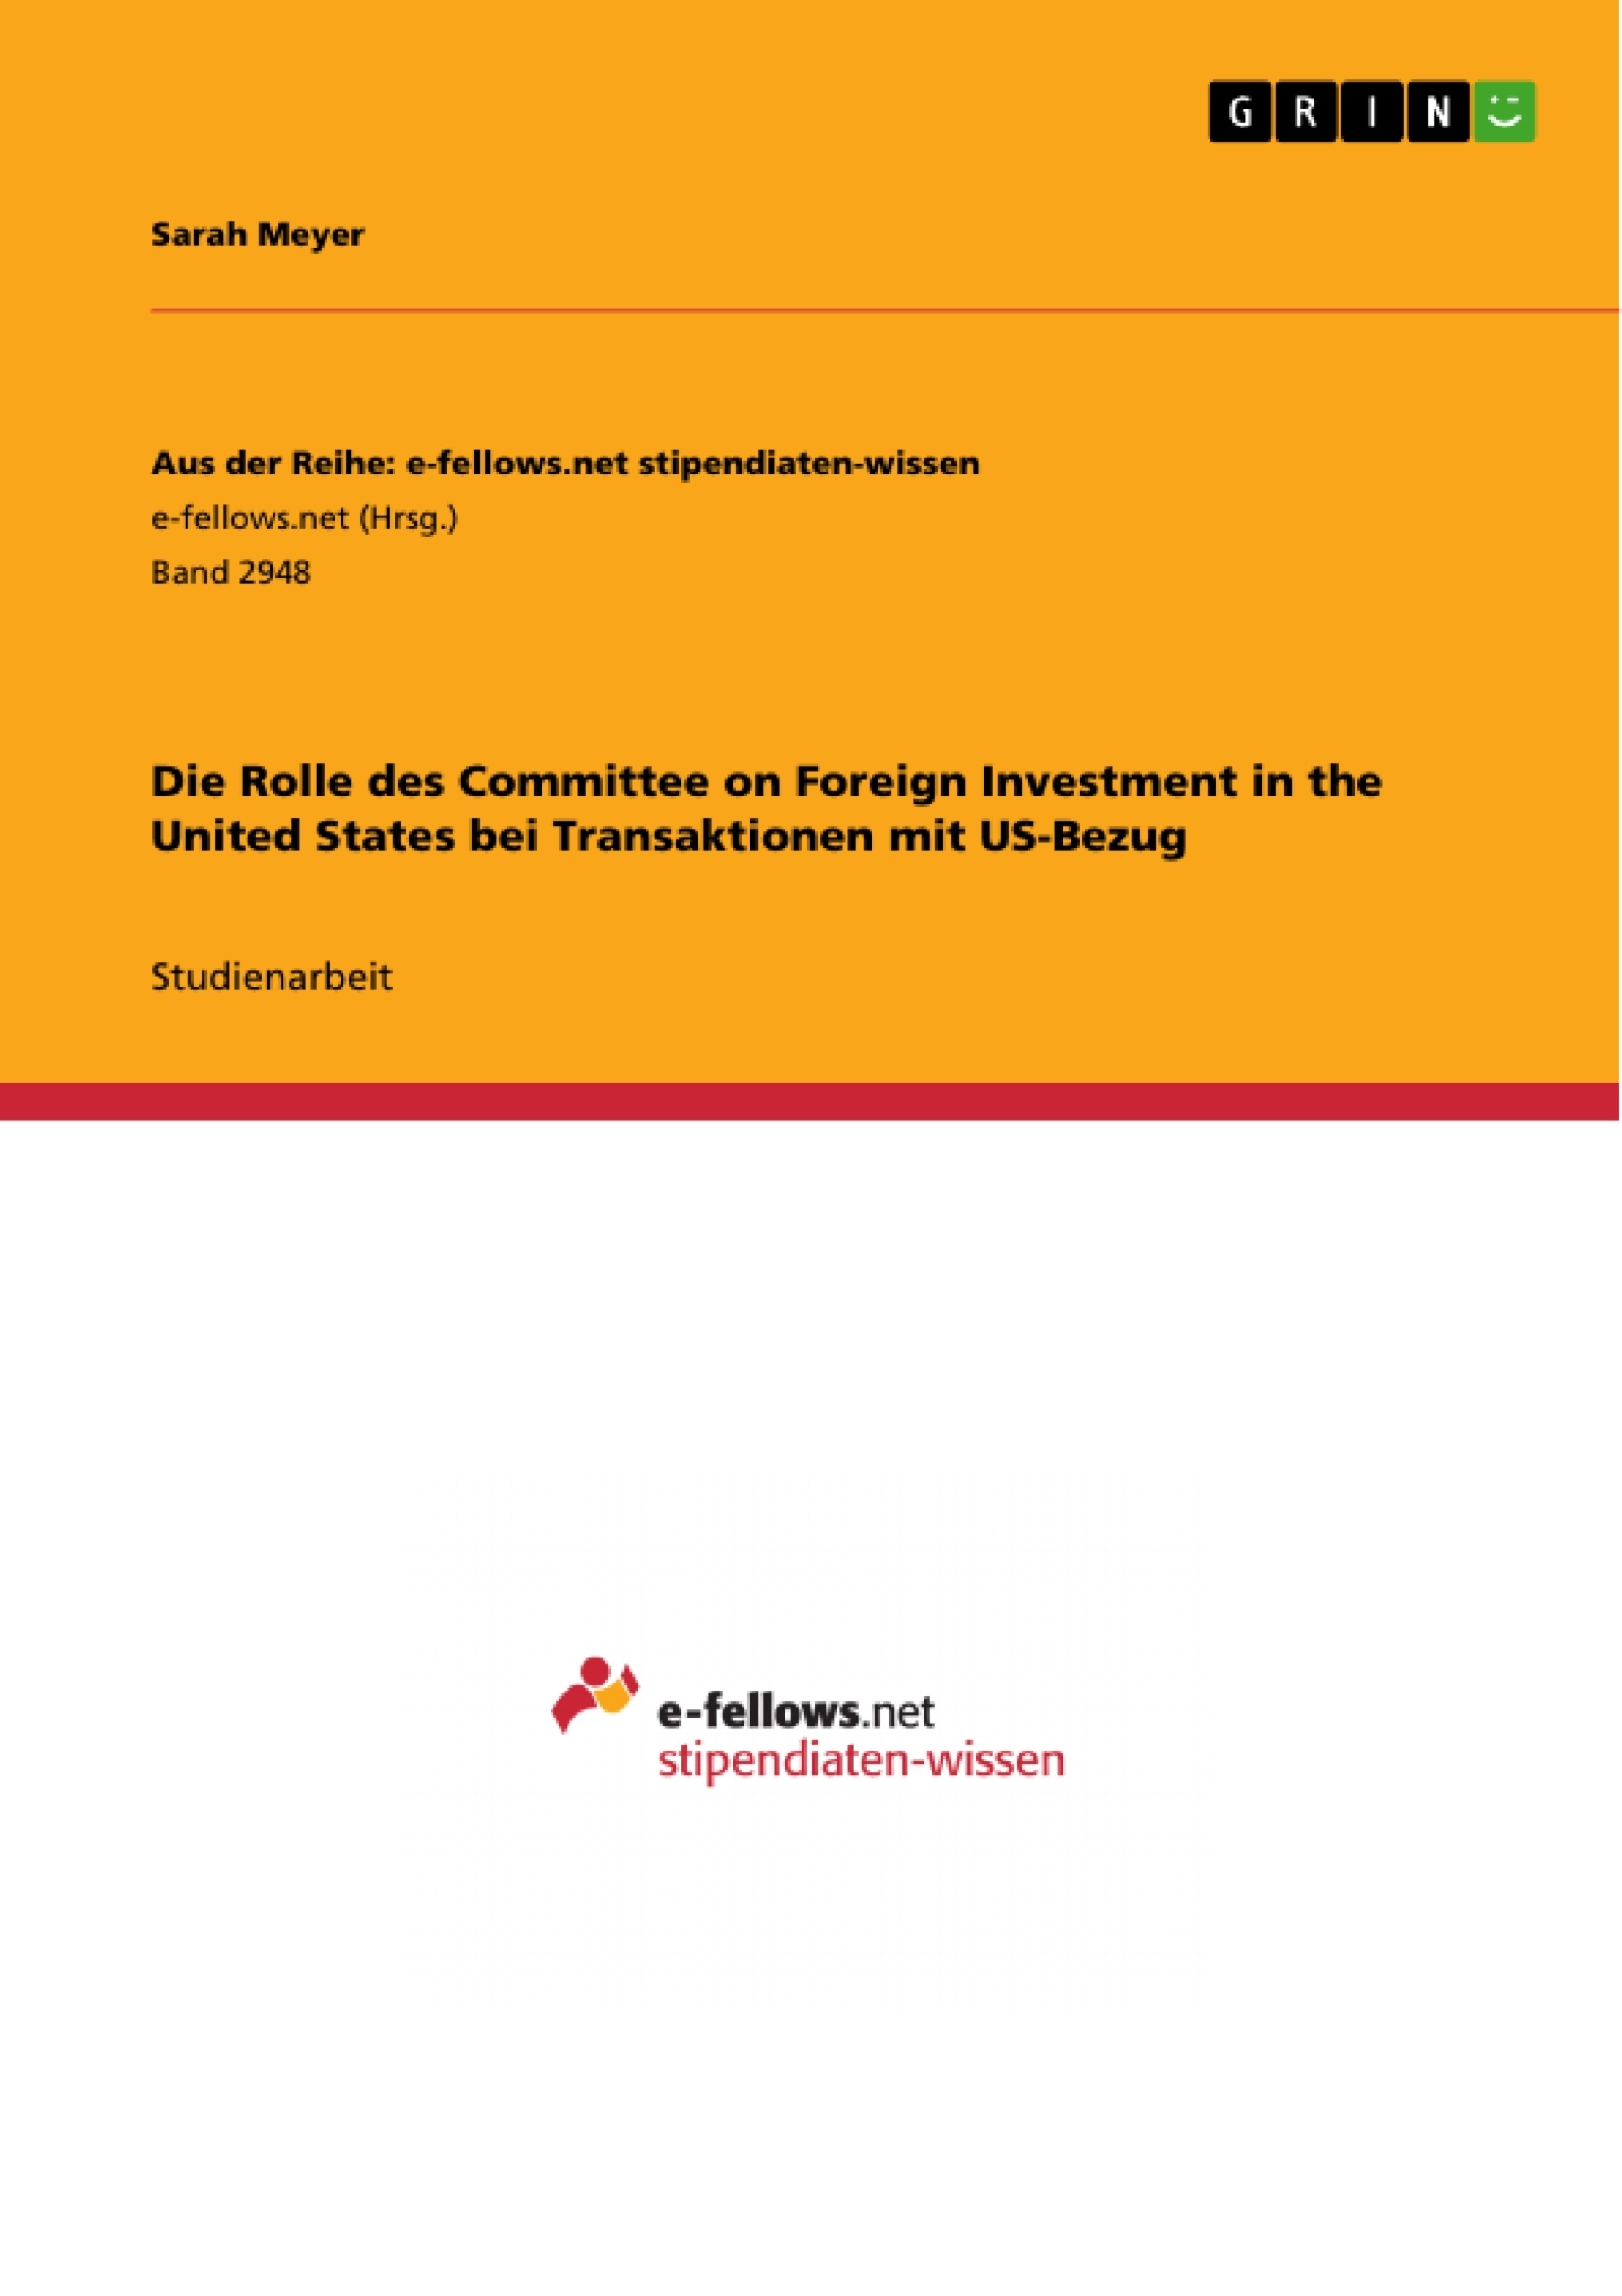 Title: Die Rolle des Committee on Foreign Investment in the United States bei Transaktionen mit US-Bezug